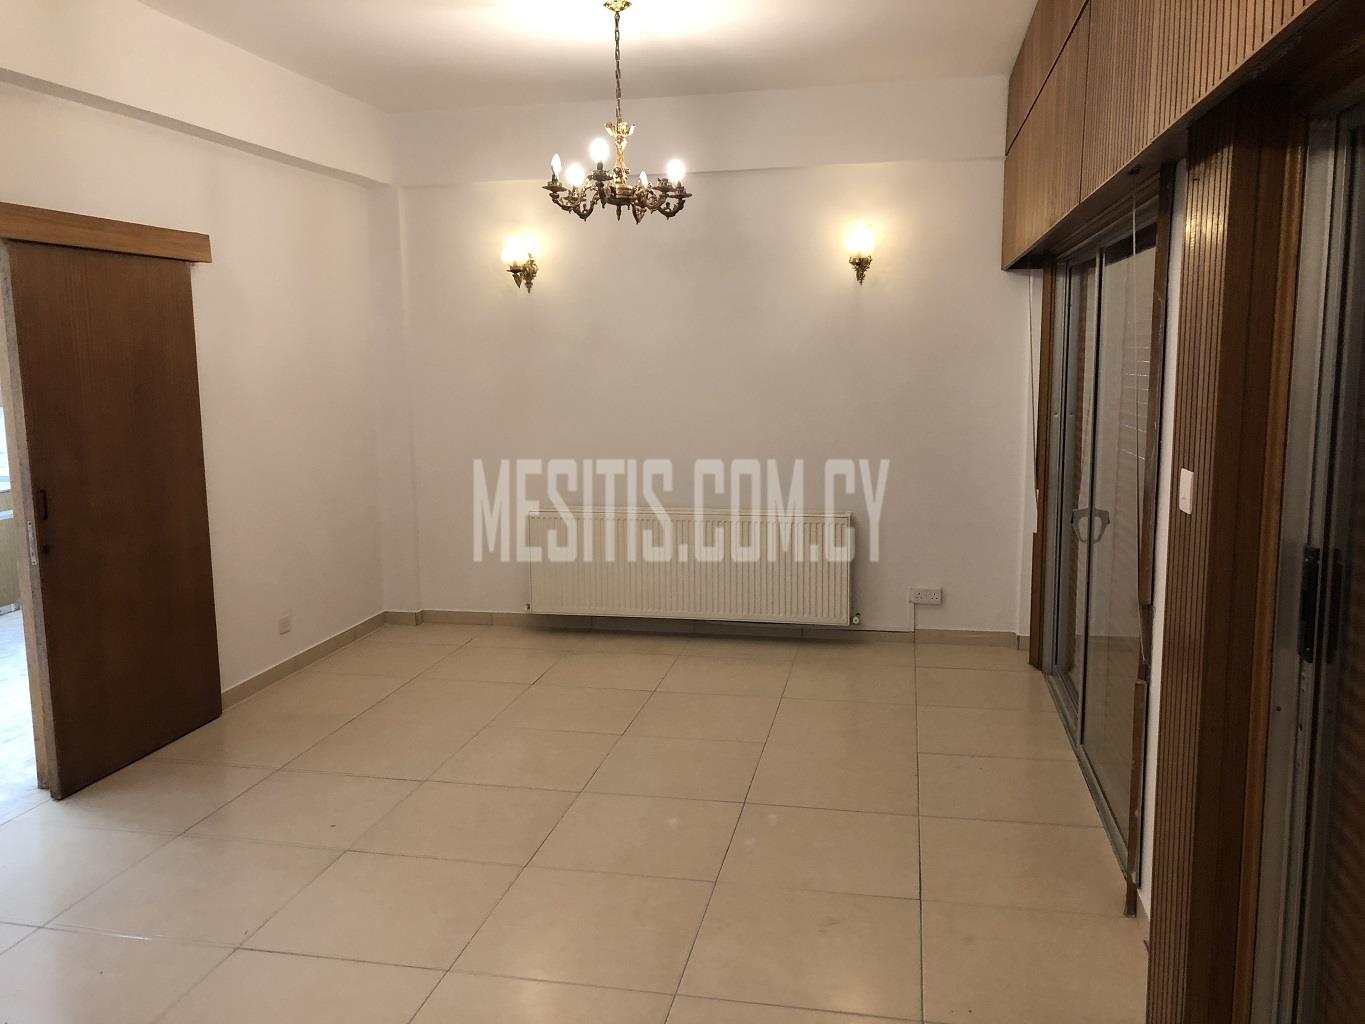 3 Bedroom Apartment For Rent In Strovolos Near Stavrou Avenue #3308-1